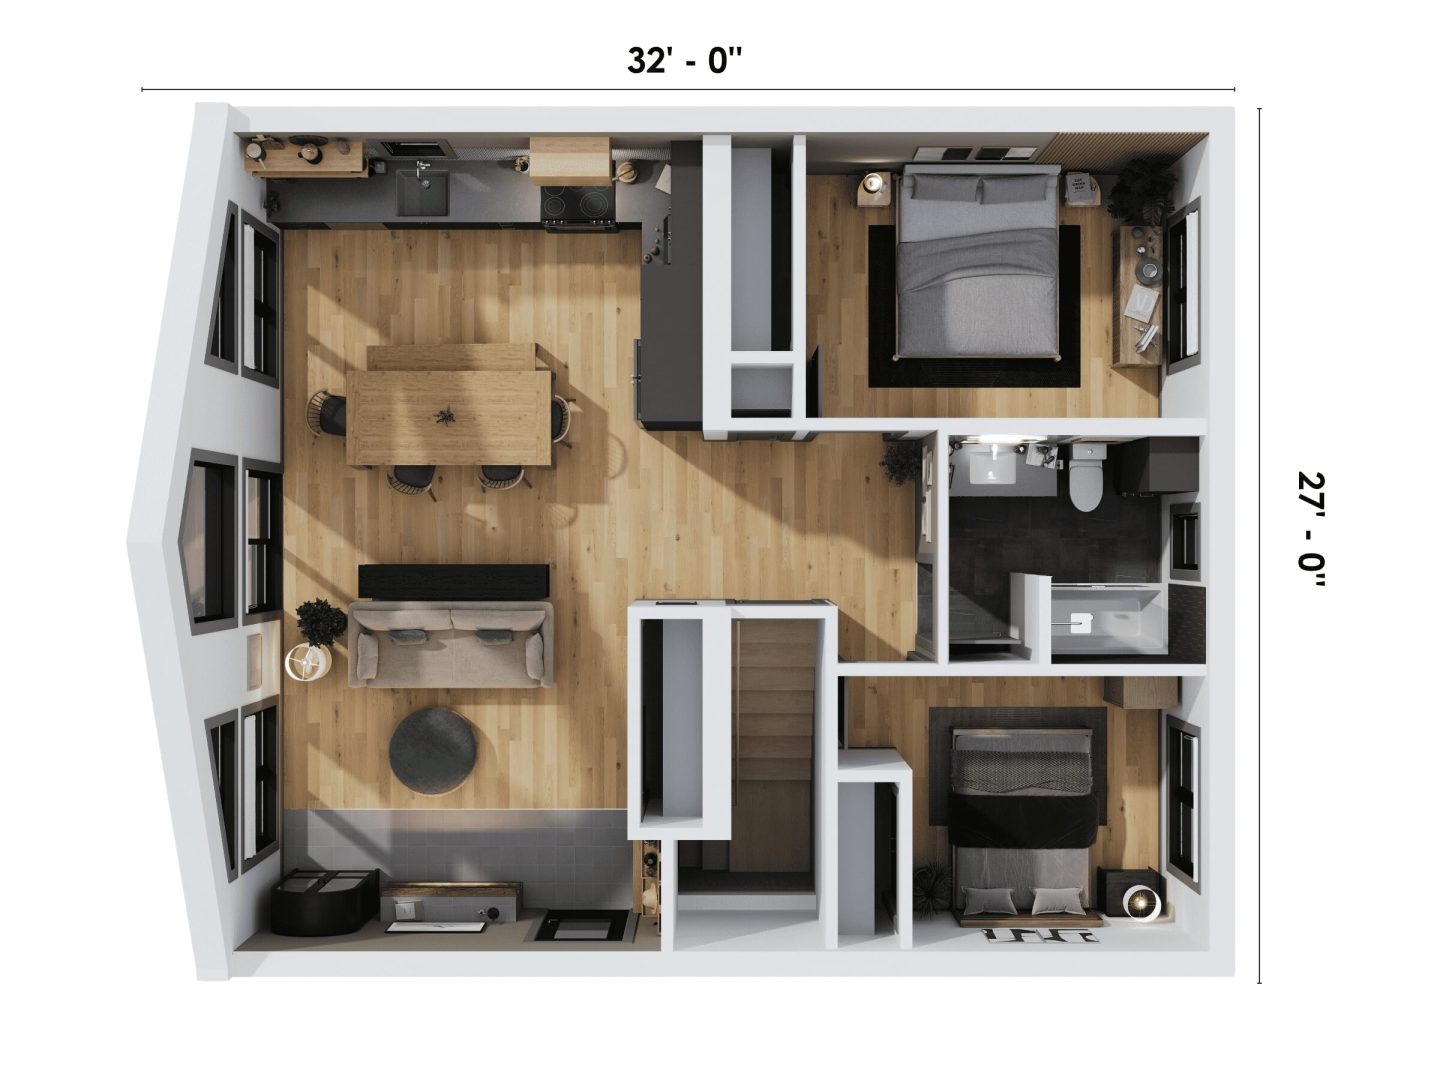 3D plan view .Faucon is a classically styled chalet.